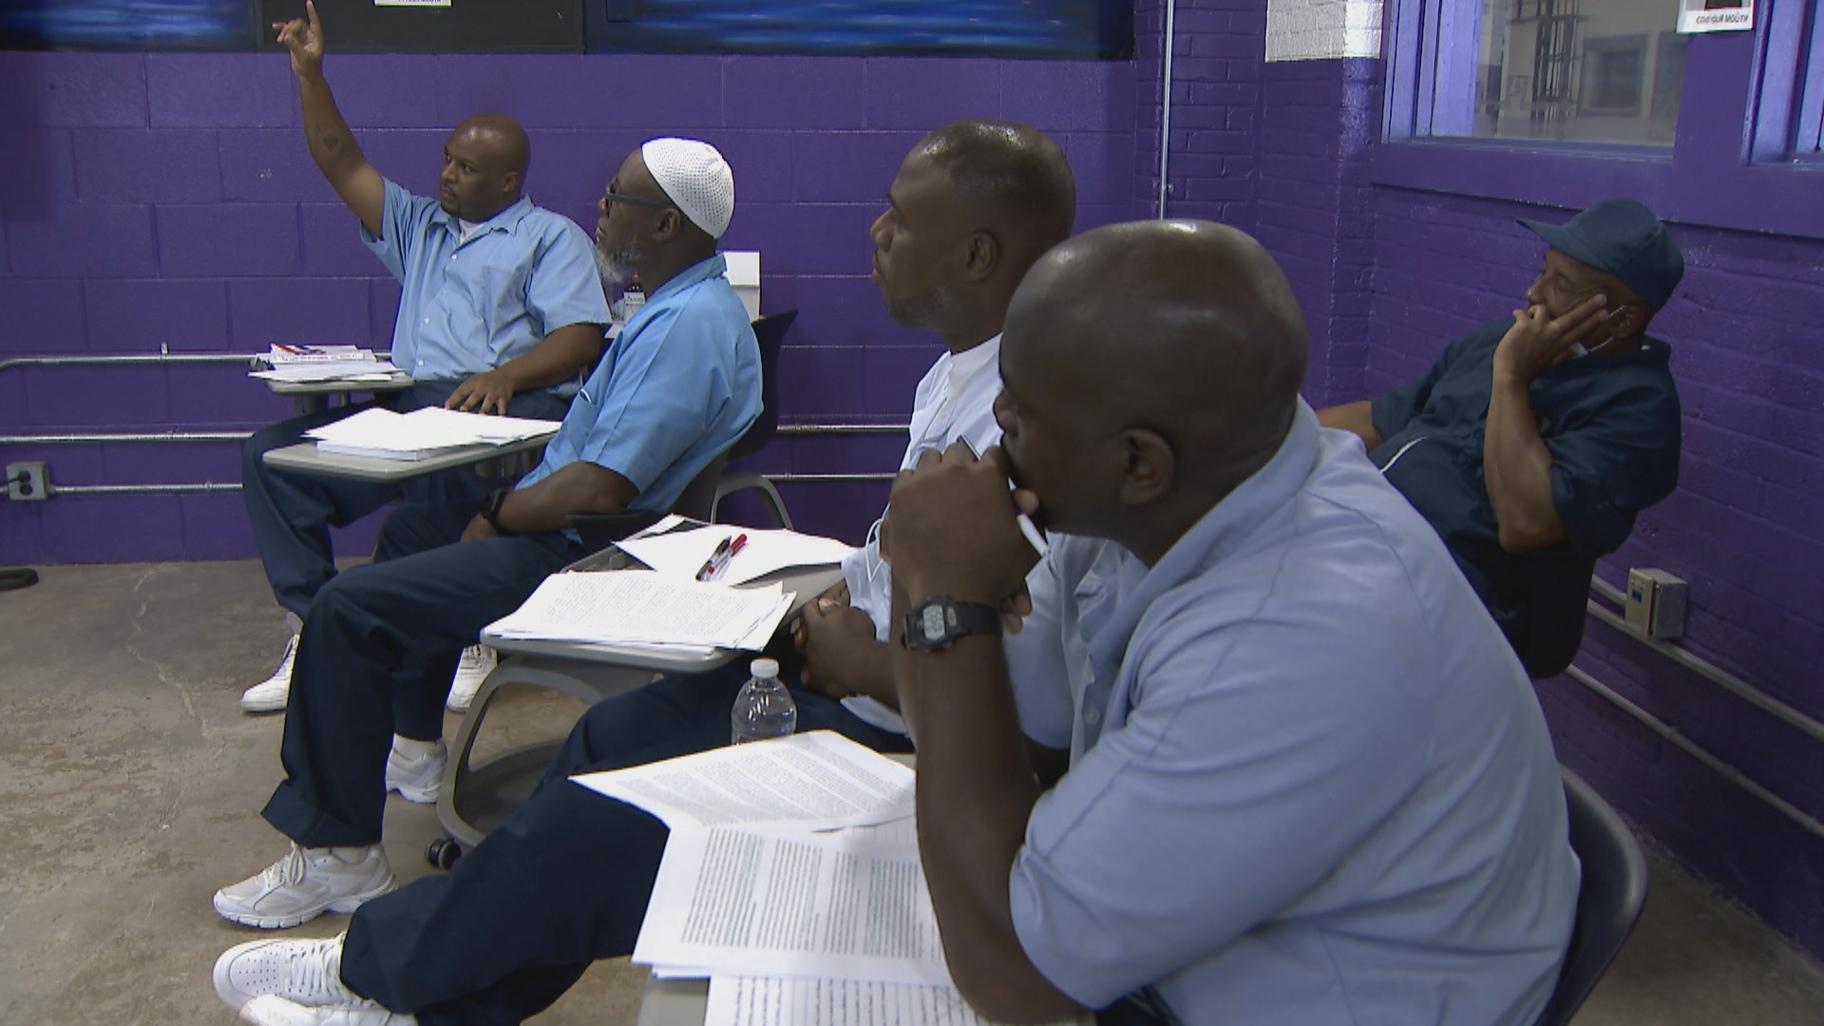 Men at Stateville Correctional Center participate in a class through Northwestern University’s Prison Education Program on Aug. 15, 2022. (WTTW News)